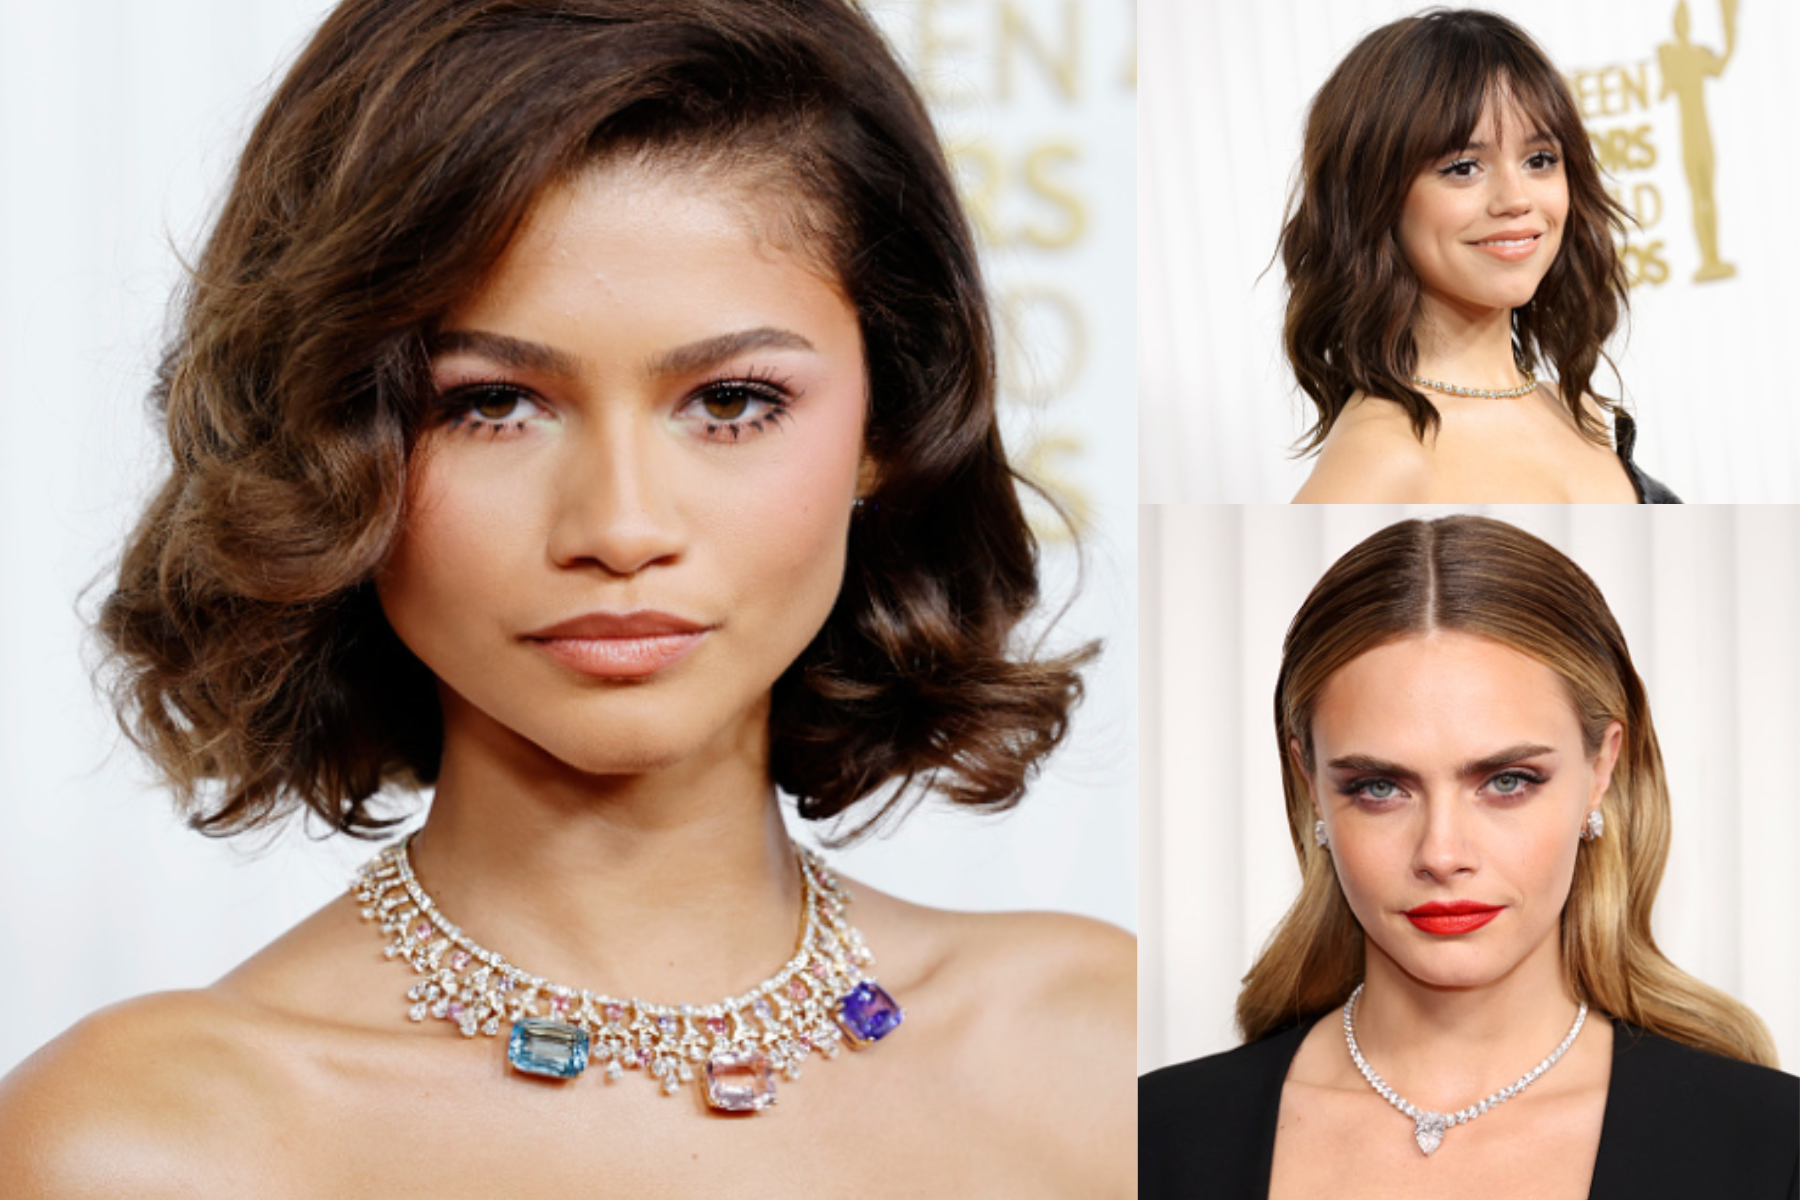 Three jewelry-clad Hollywood actresses